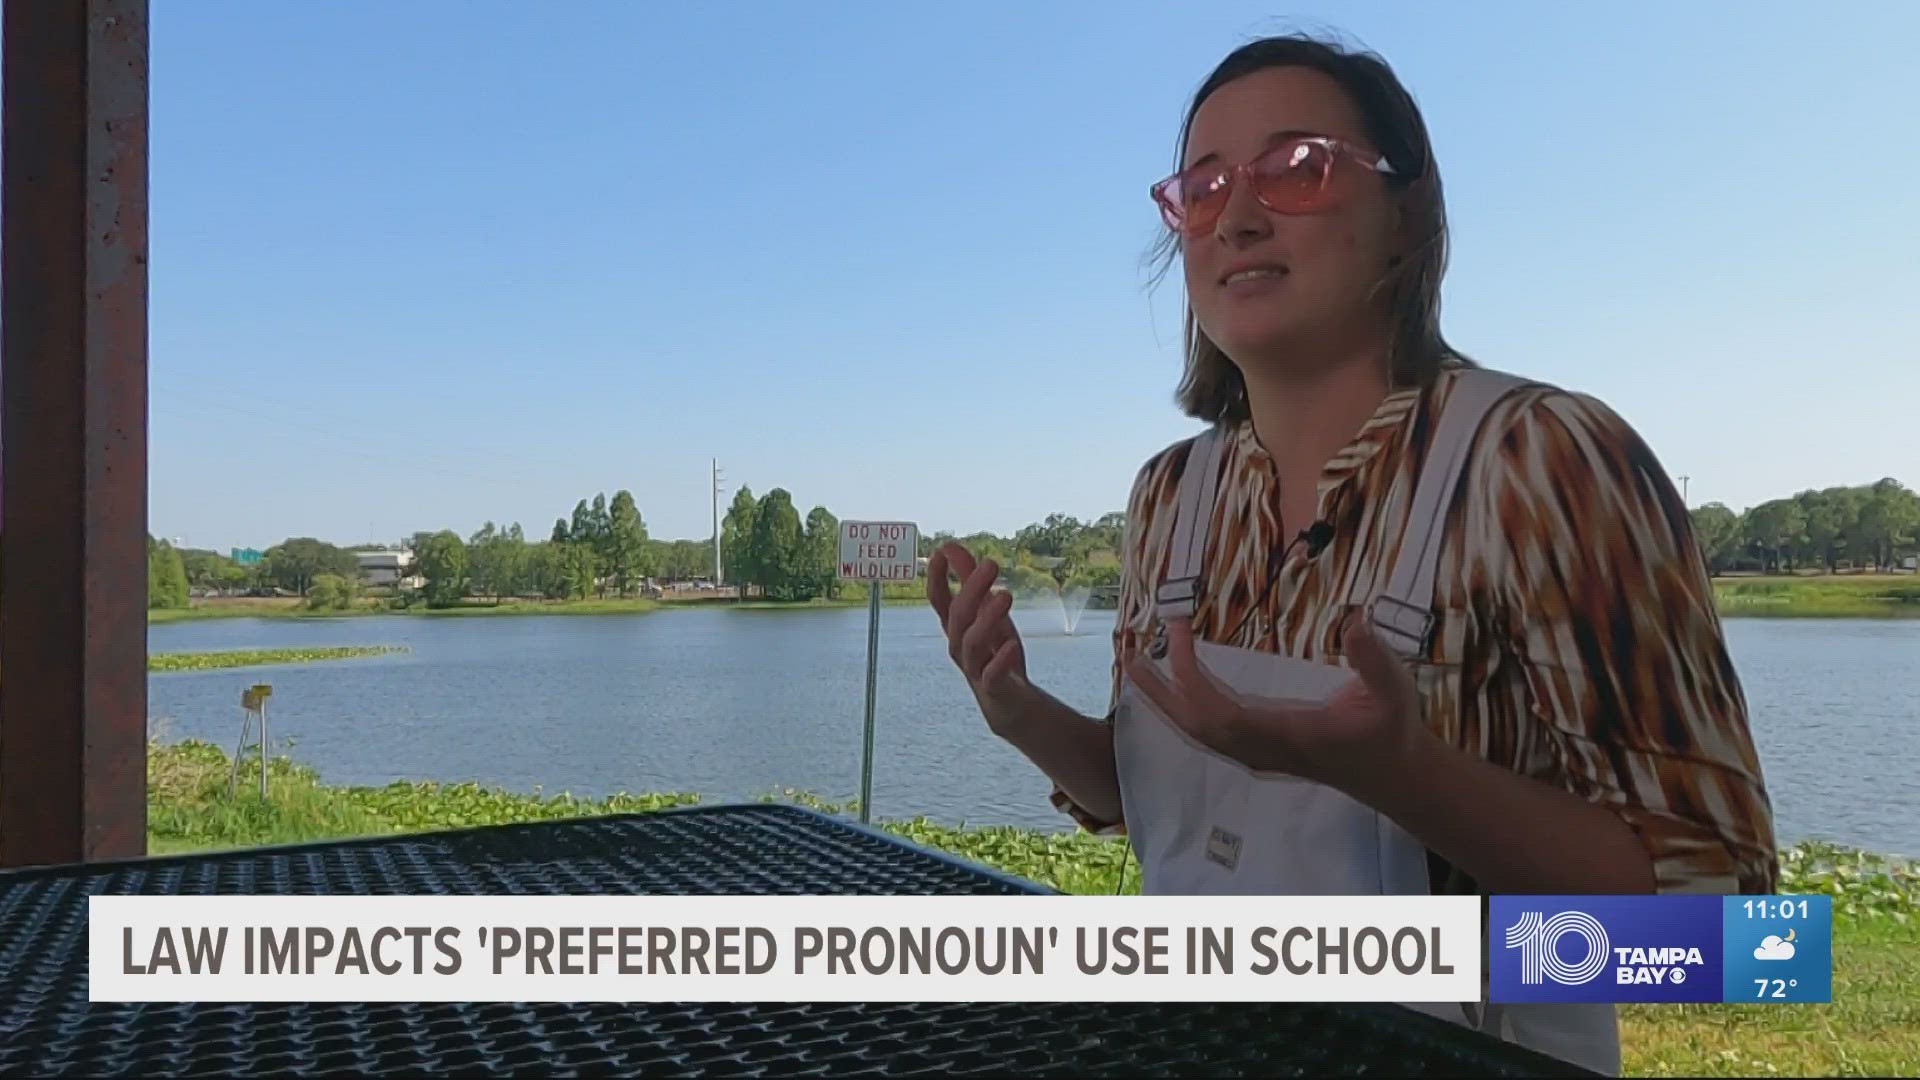 A bill, which is expected to become law, prevents school staffers from using pronouns that don’t correspond to their biological sex.